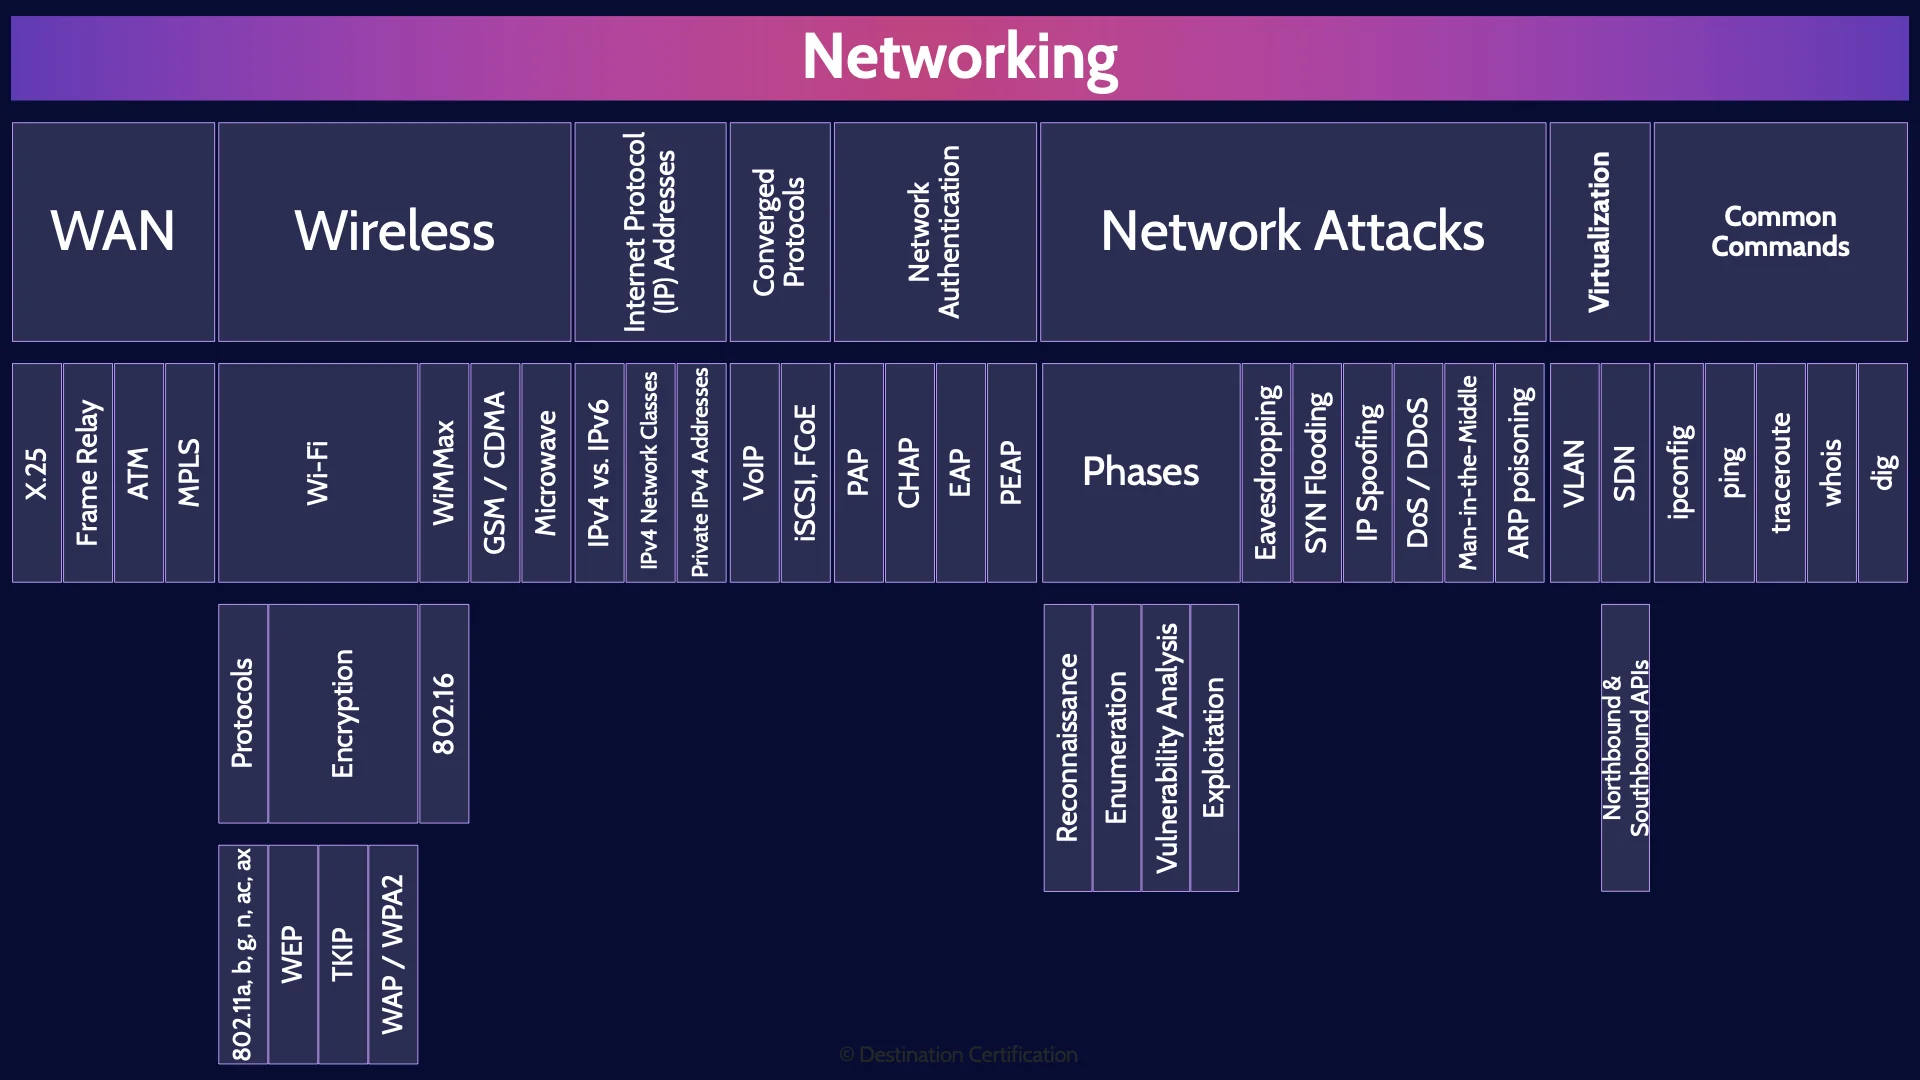 Image of networking table - Destination Certification